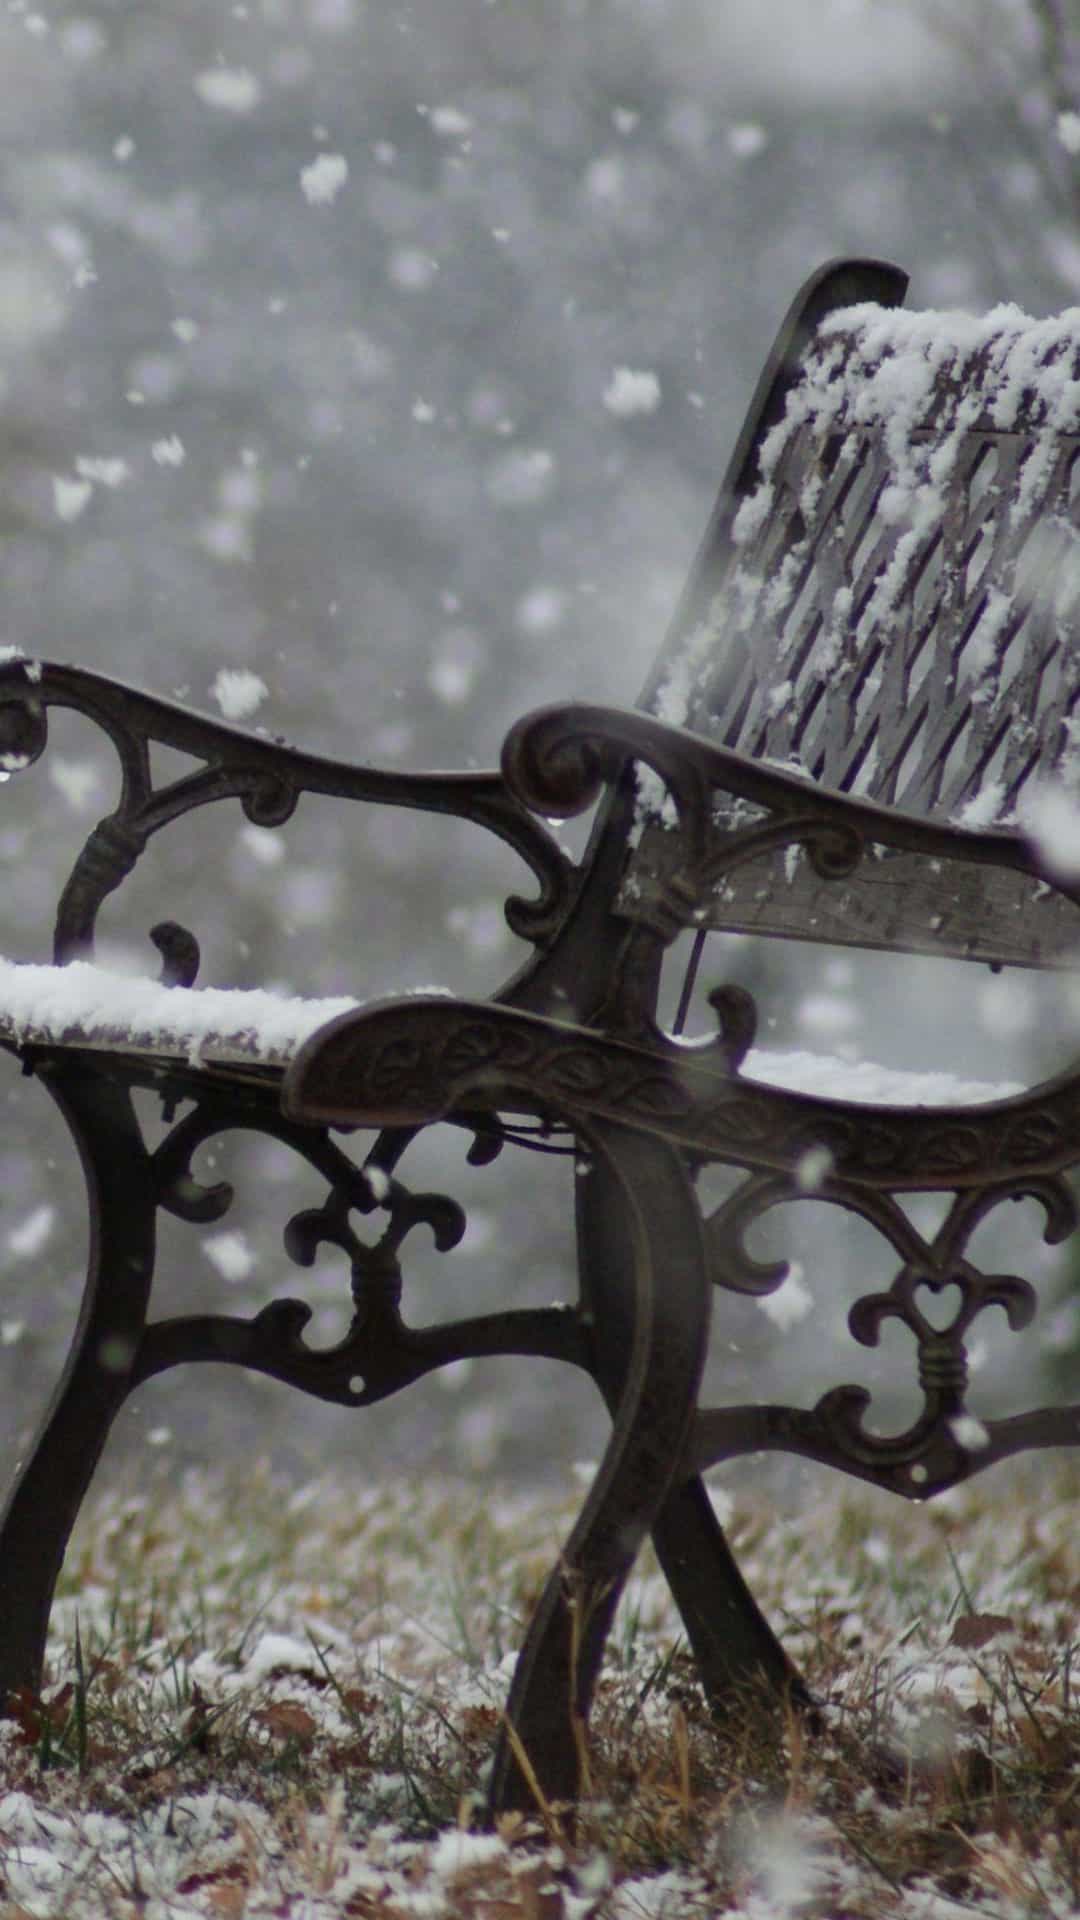 Falling Snow Iron Bench Android Wallpaper